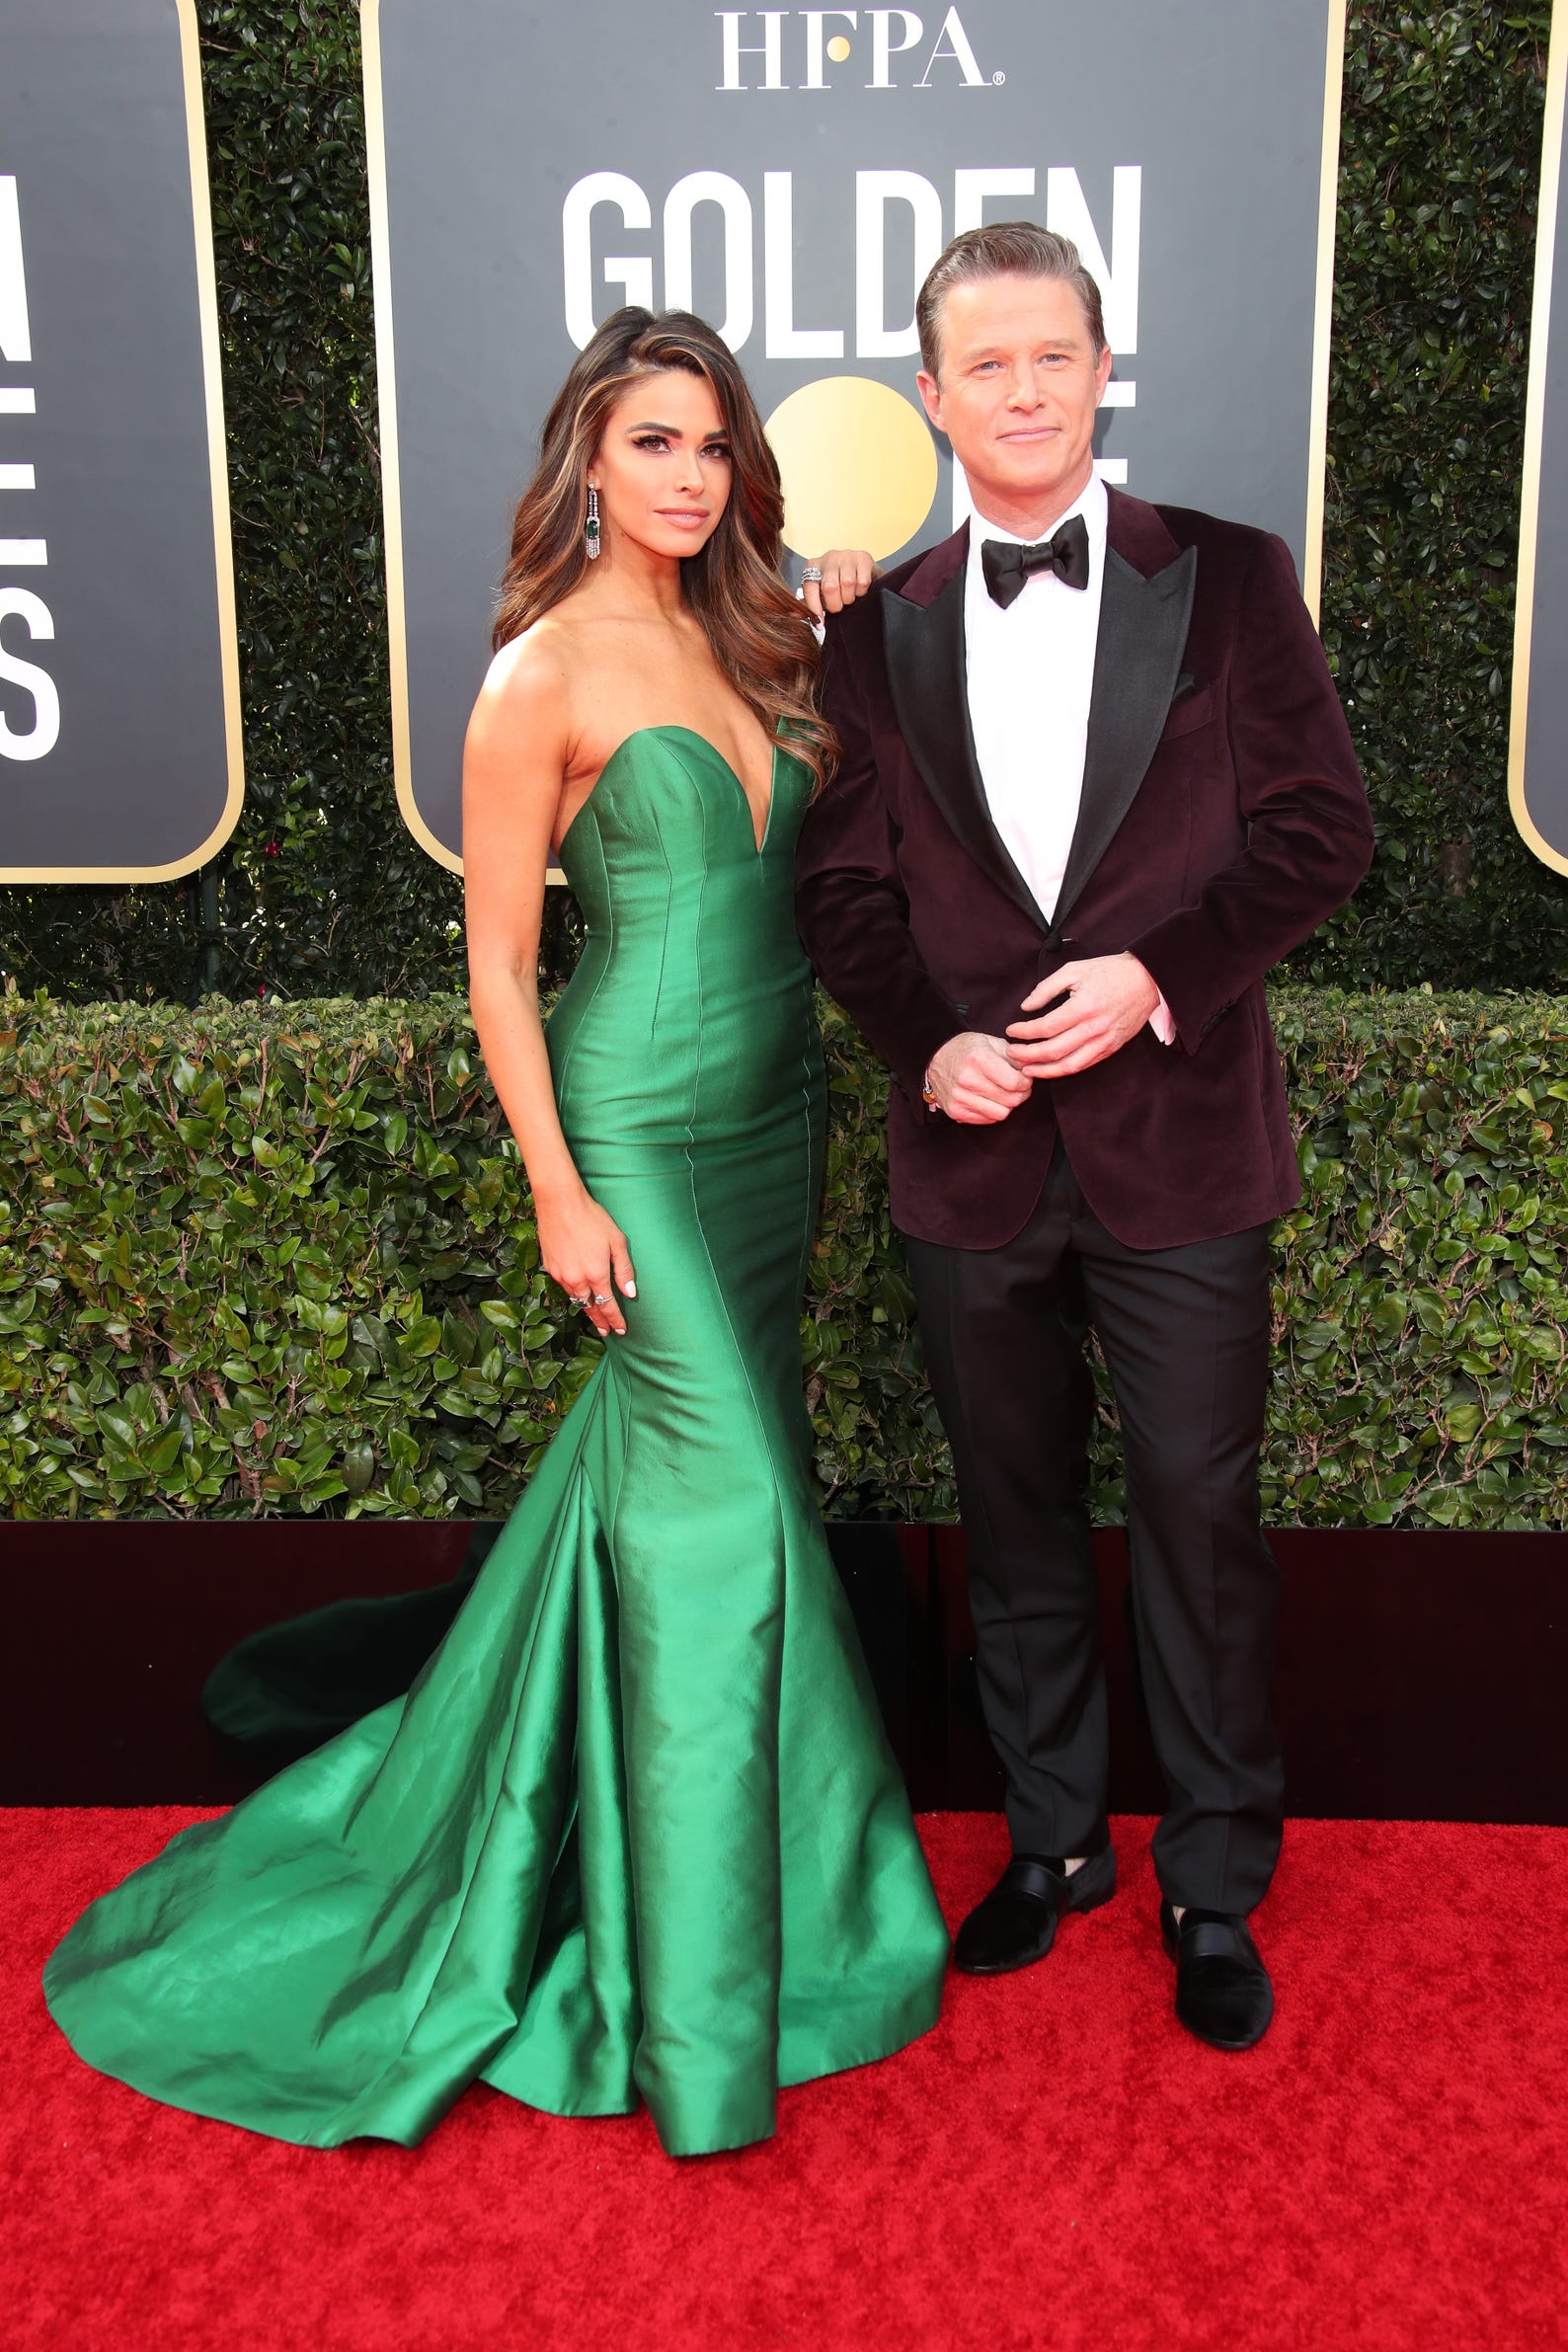 Jennifer Lahmers, left, and "Extra" co-host Billy Bush